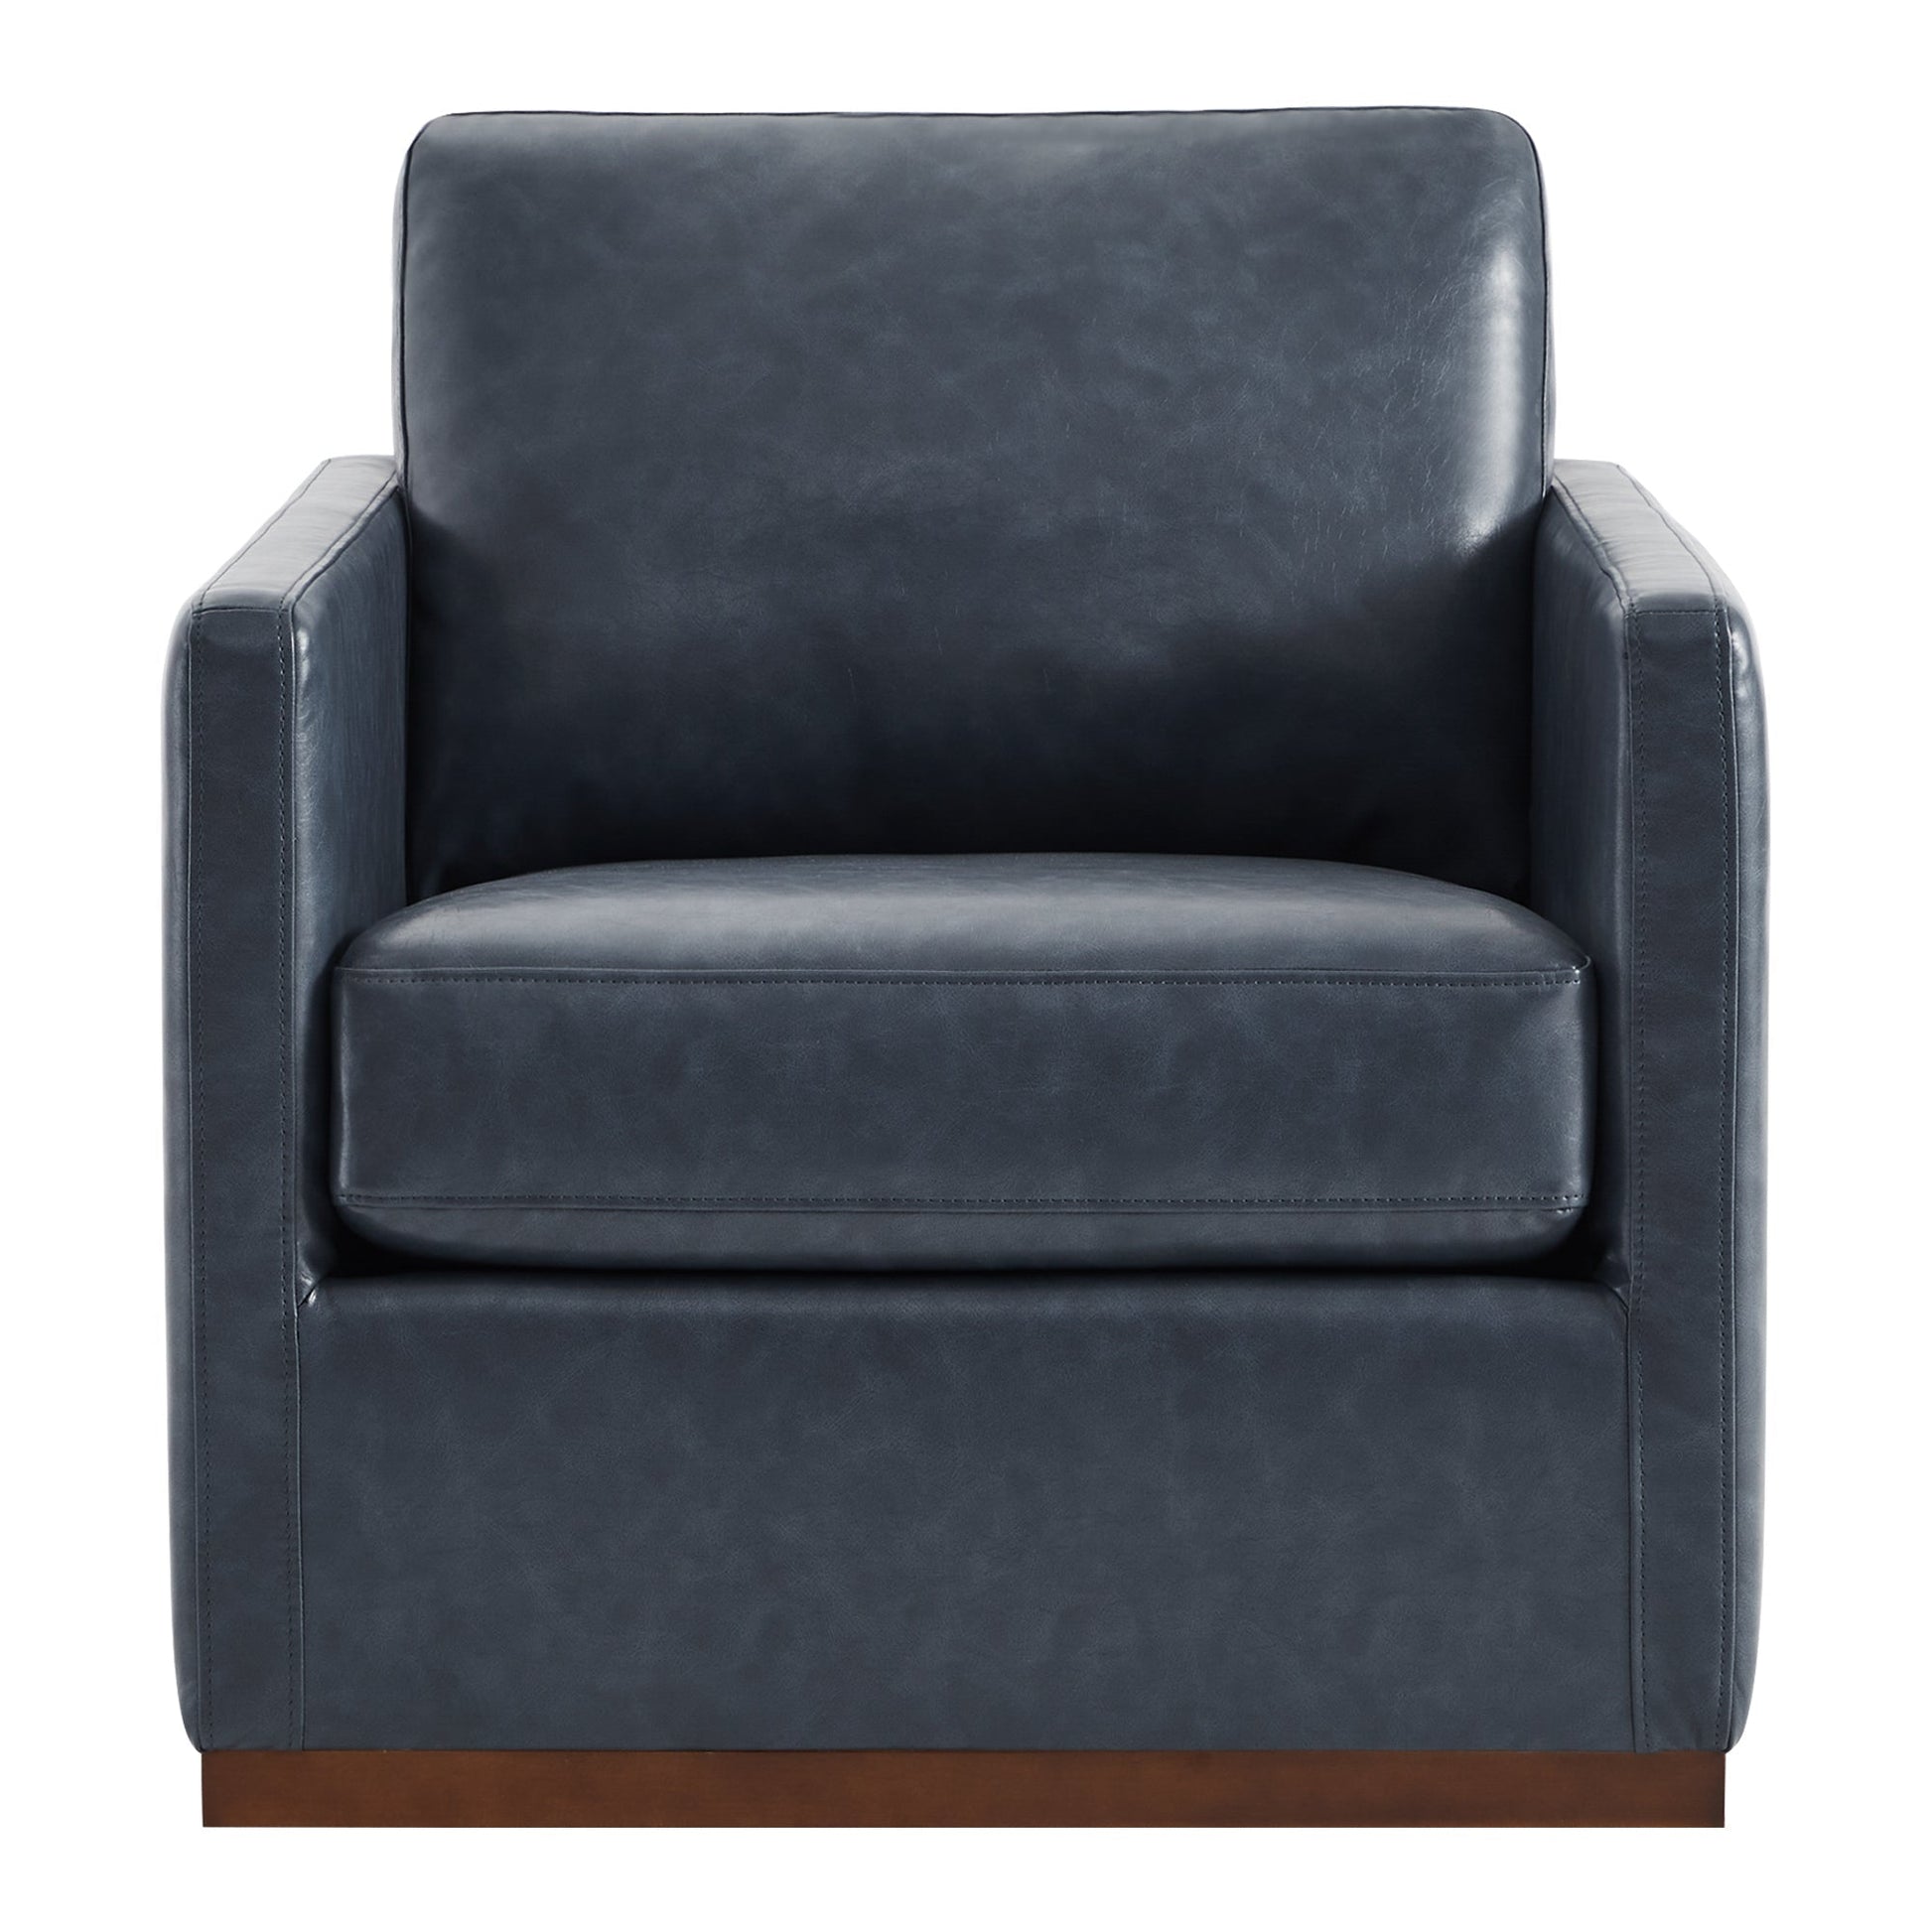 CHITA LIVING-Henry Swivel Accent Chair-Accent Chair-Faux Leather-Navy Blue-